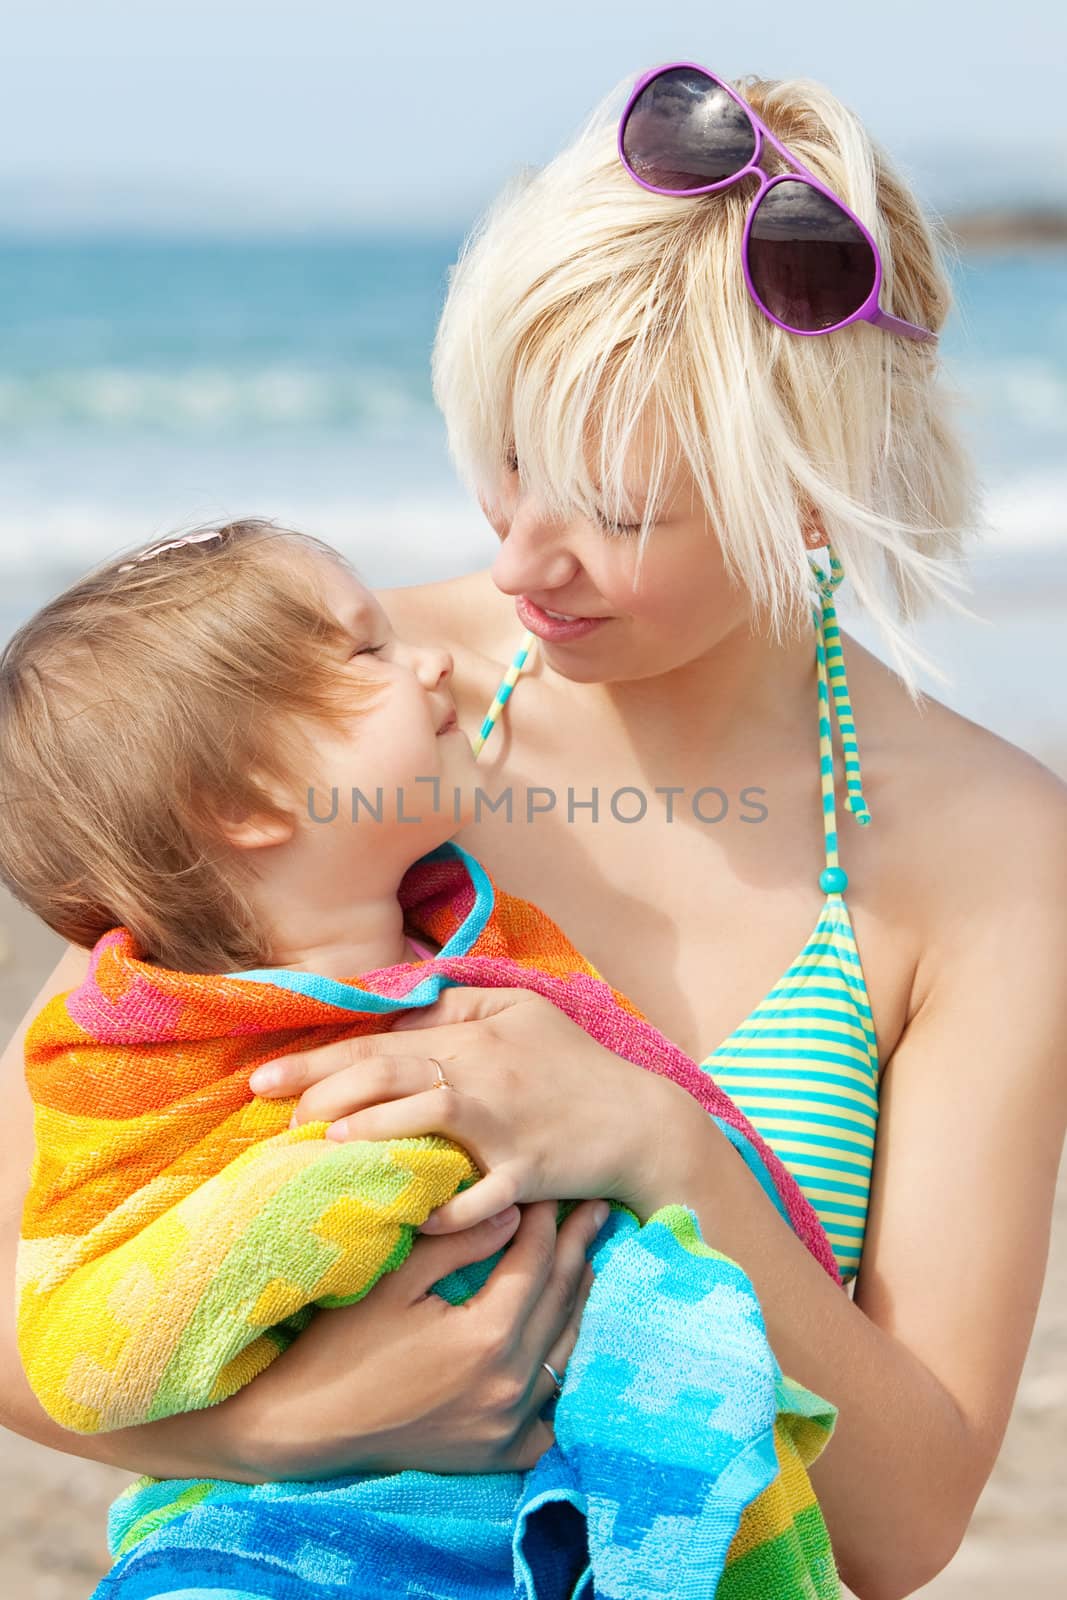 A portrait of a smiling girl in a towel in the arms of her mother at the beach